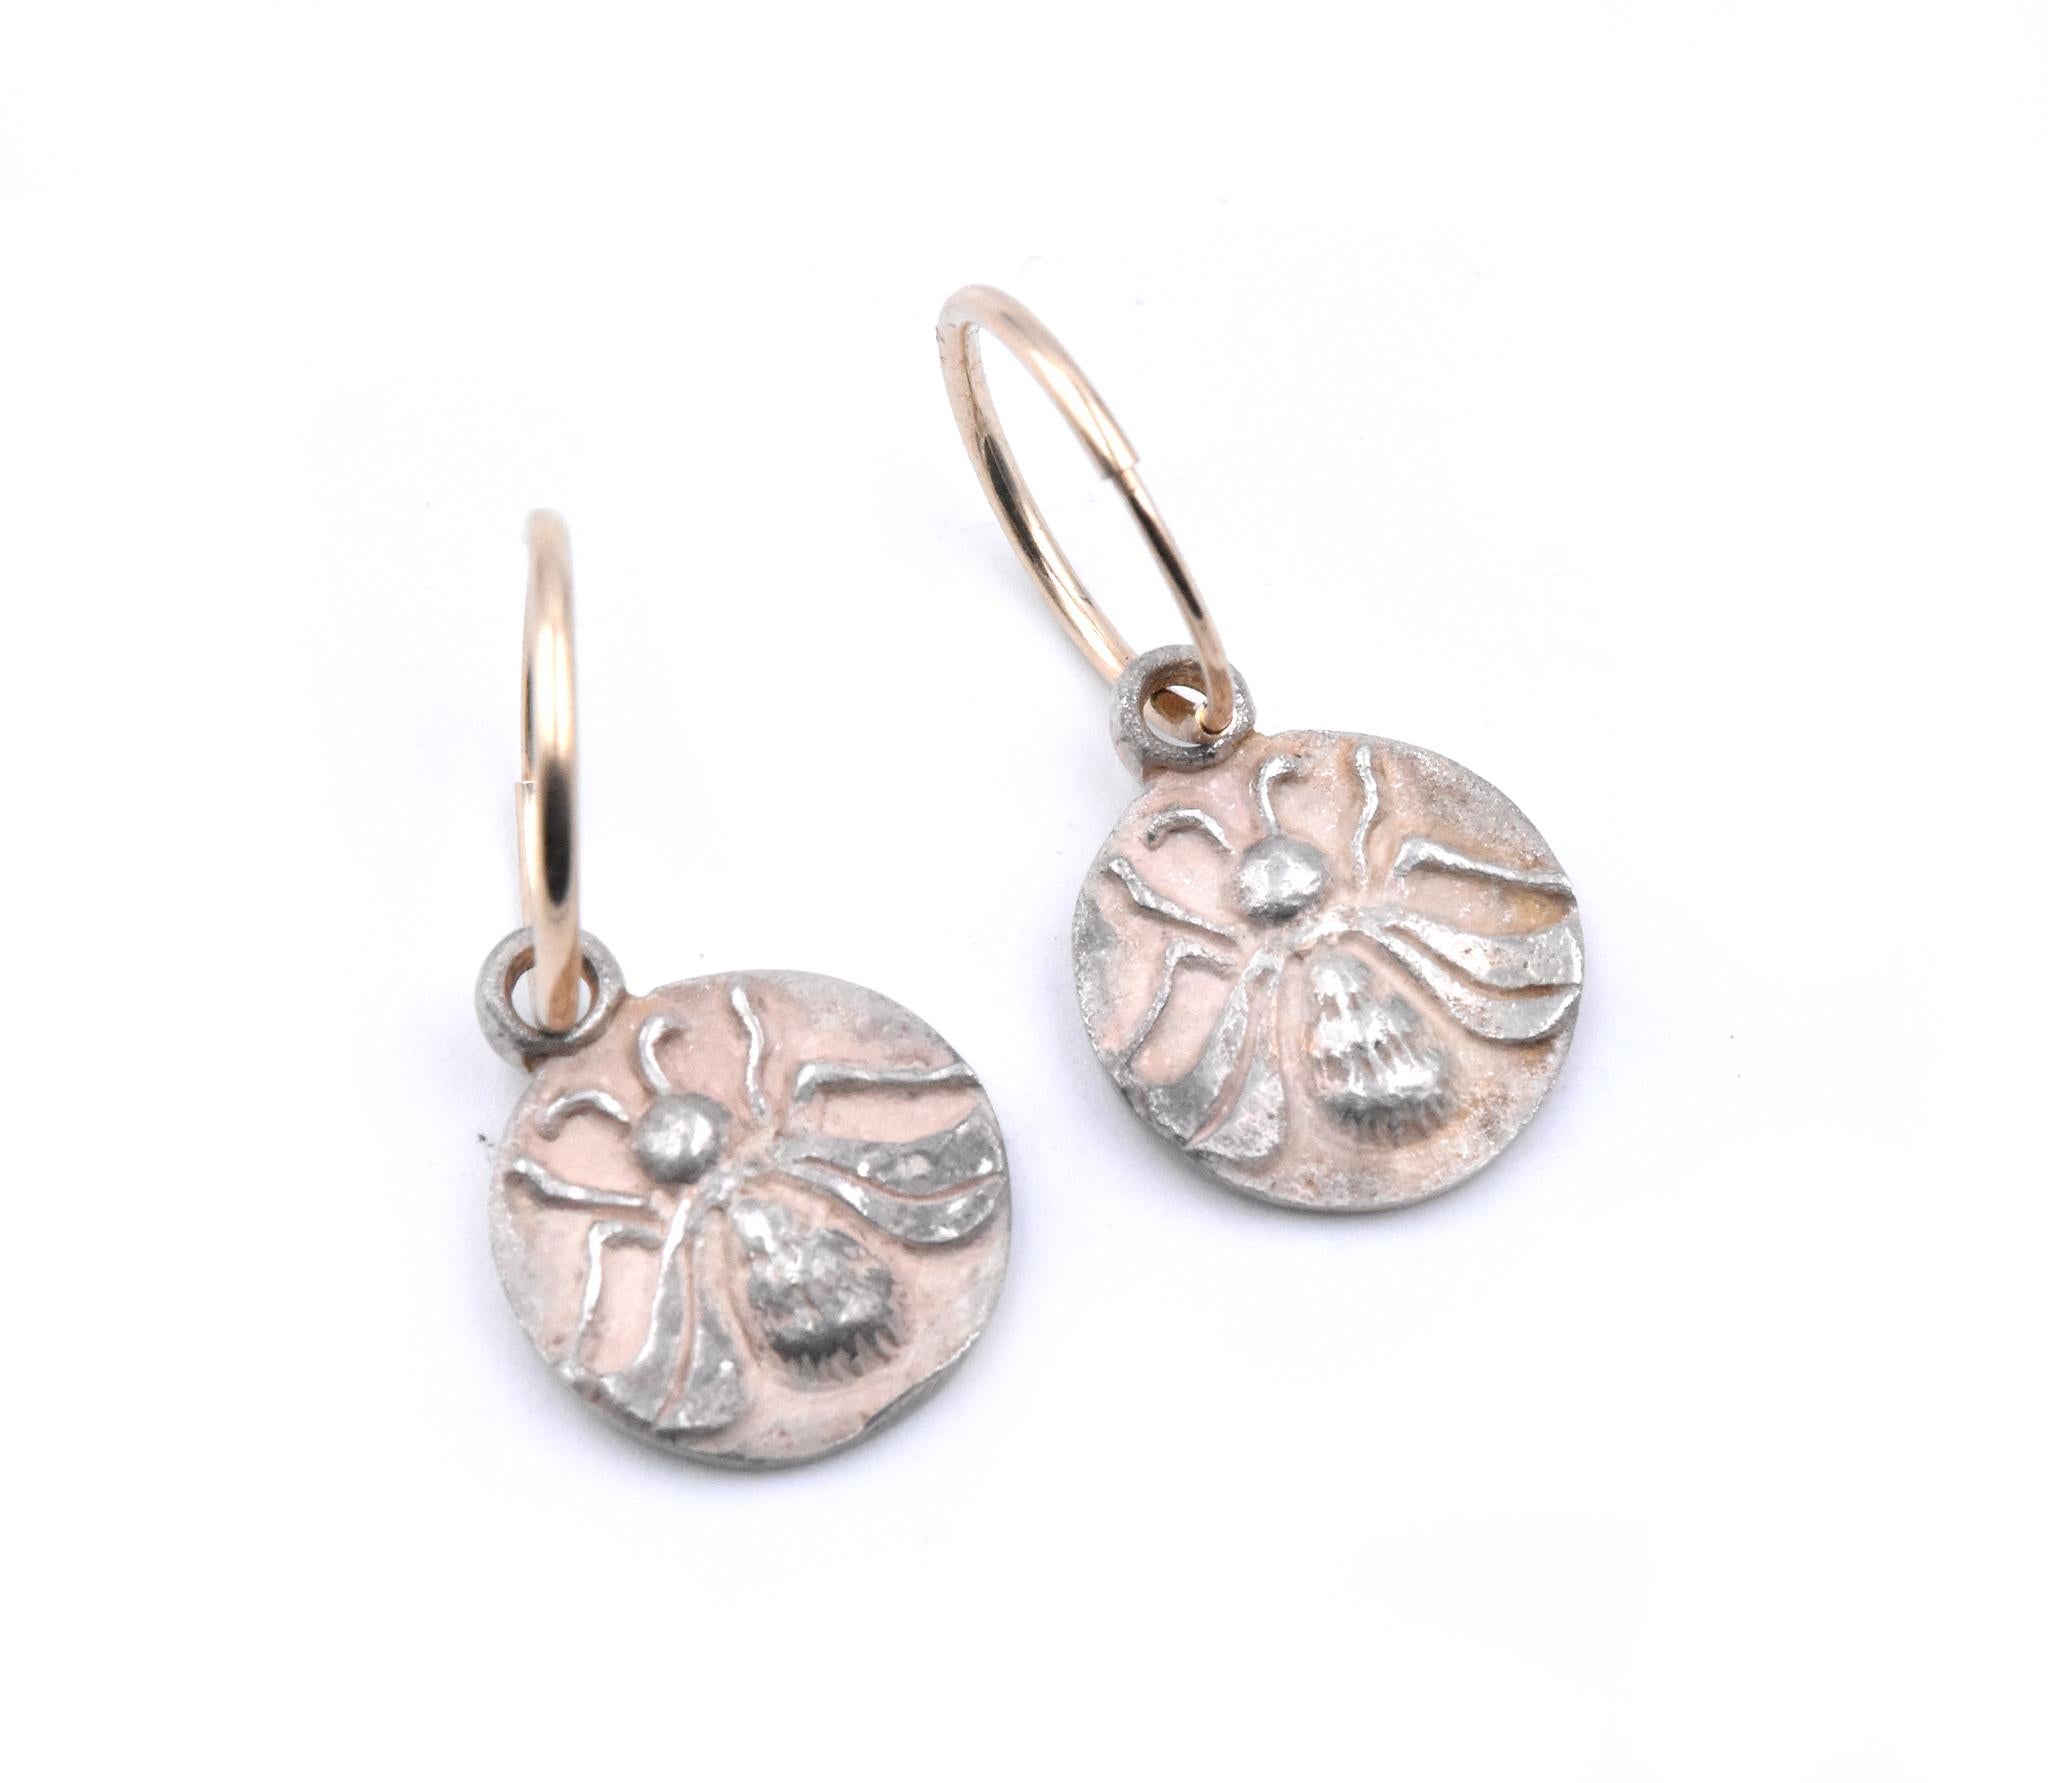 Designer: Lee Brevard
Material: 14K Yellow Gold and Sterling Silver
Dimensions: the earring measures 25.02 X 12.03mm
Weight: 2.96 grams
